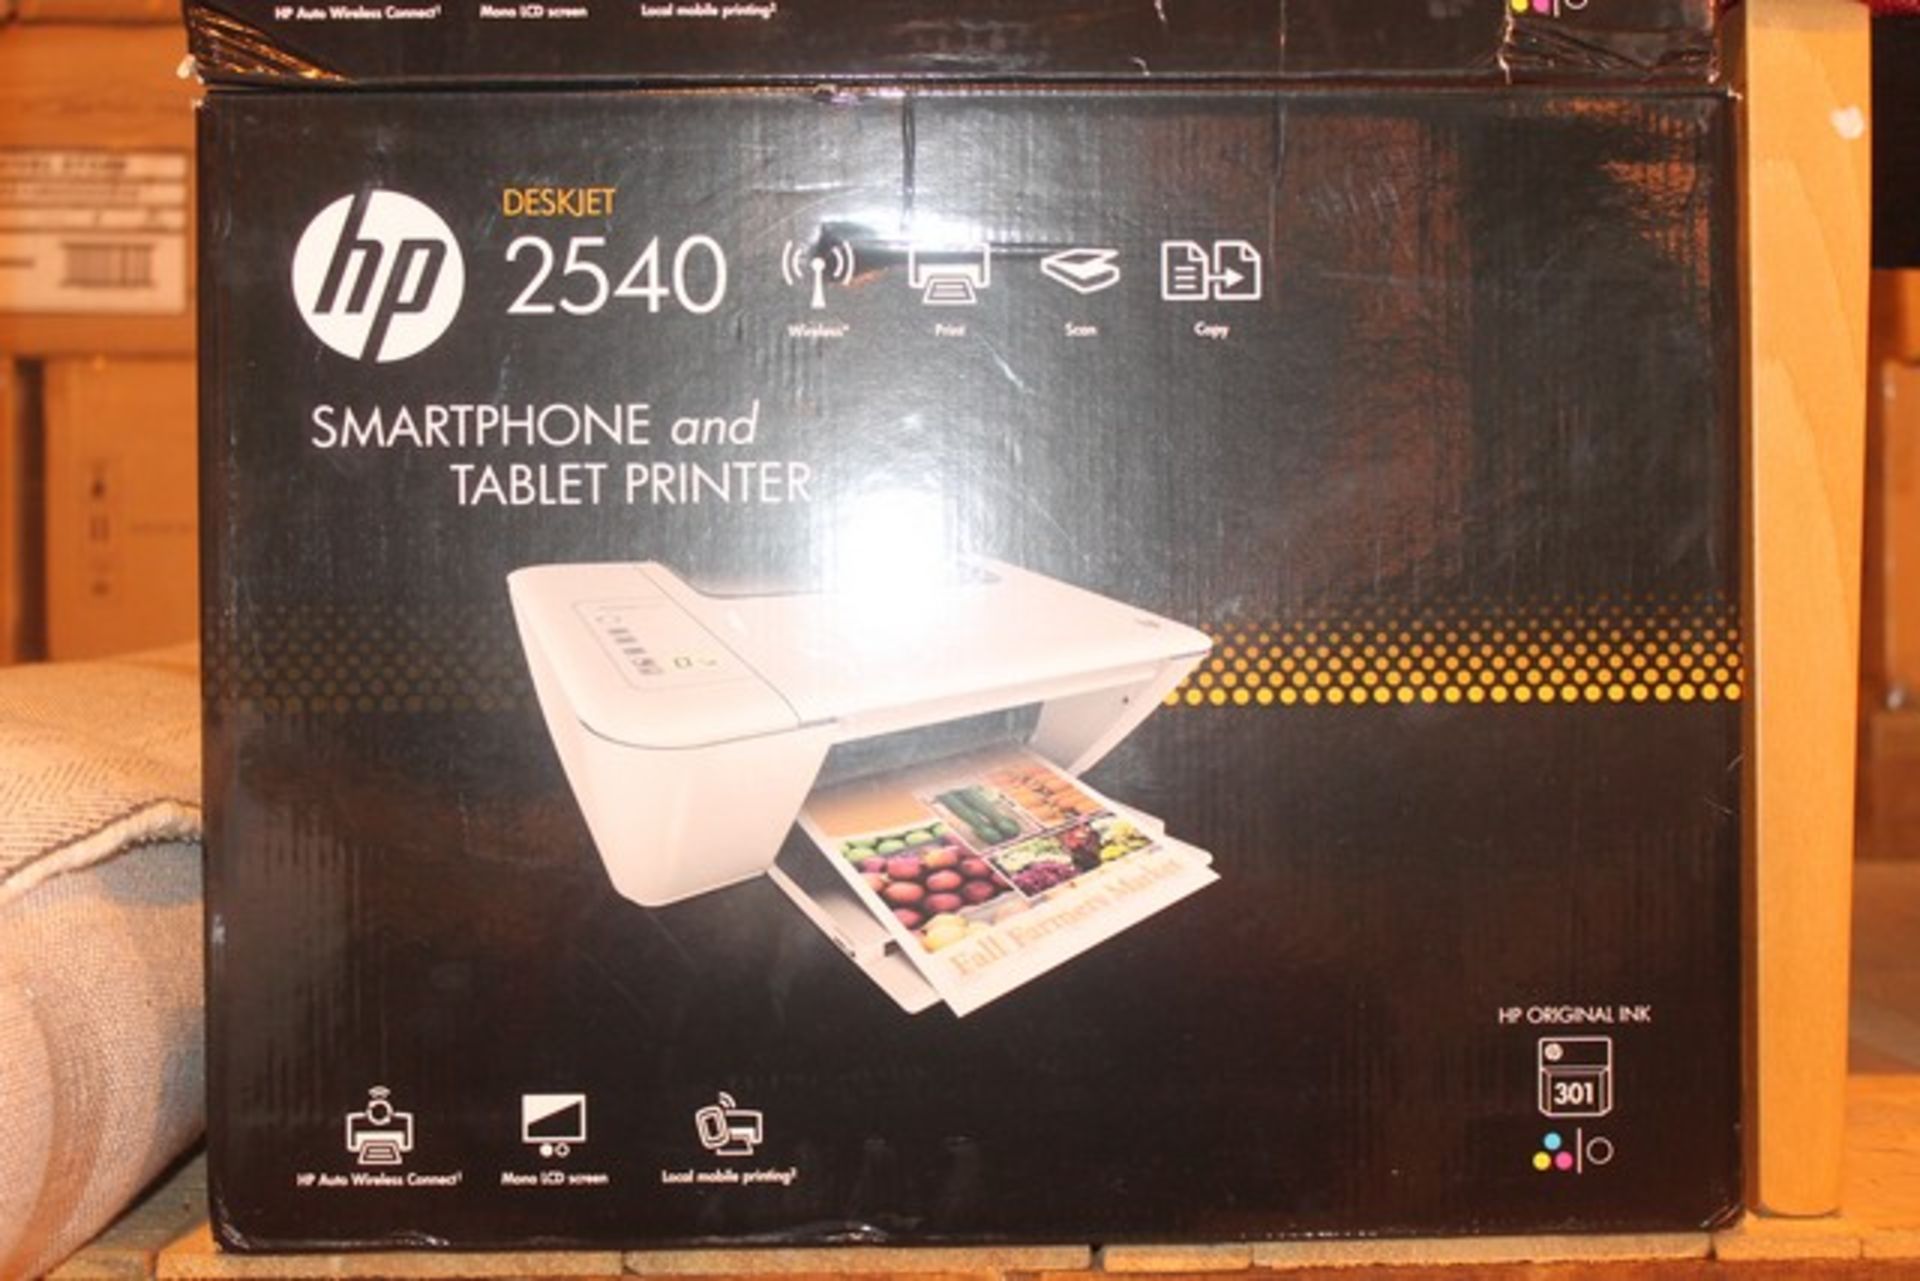 1 x BOXED HP DESK JET 2540 SMART PHONE AND TABLET PRINTER (545276)  *PLEASE NOTE THAT THE BID